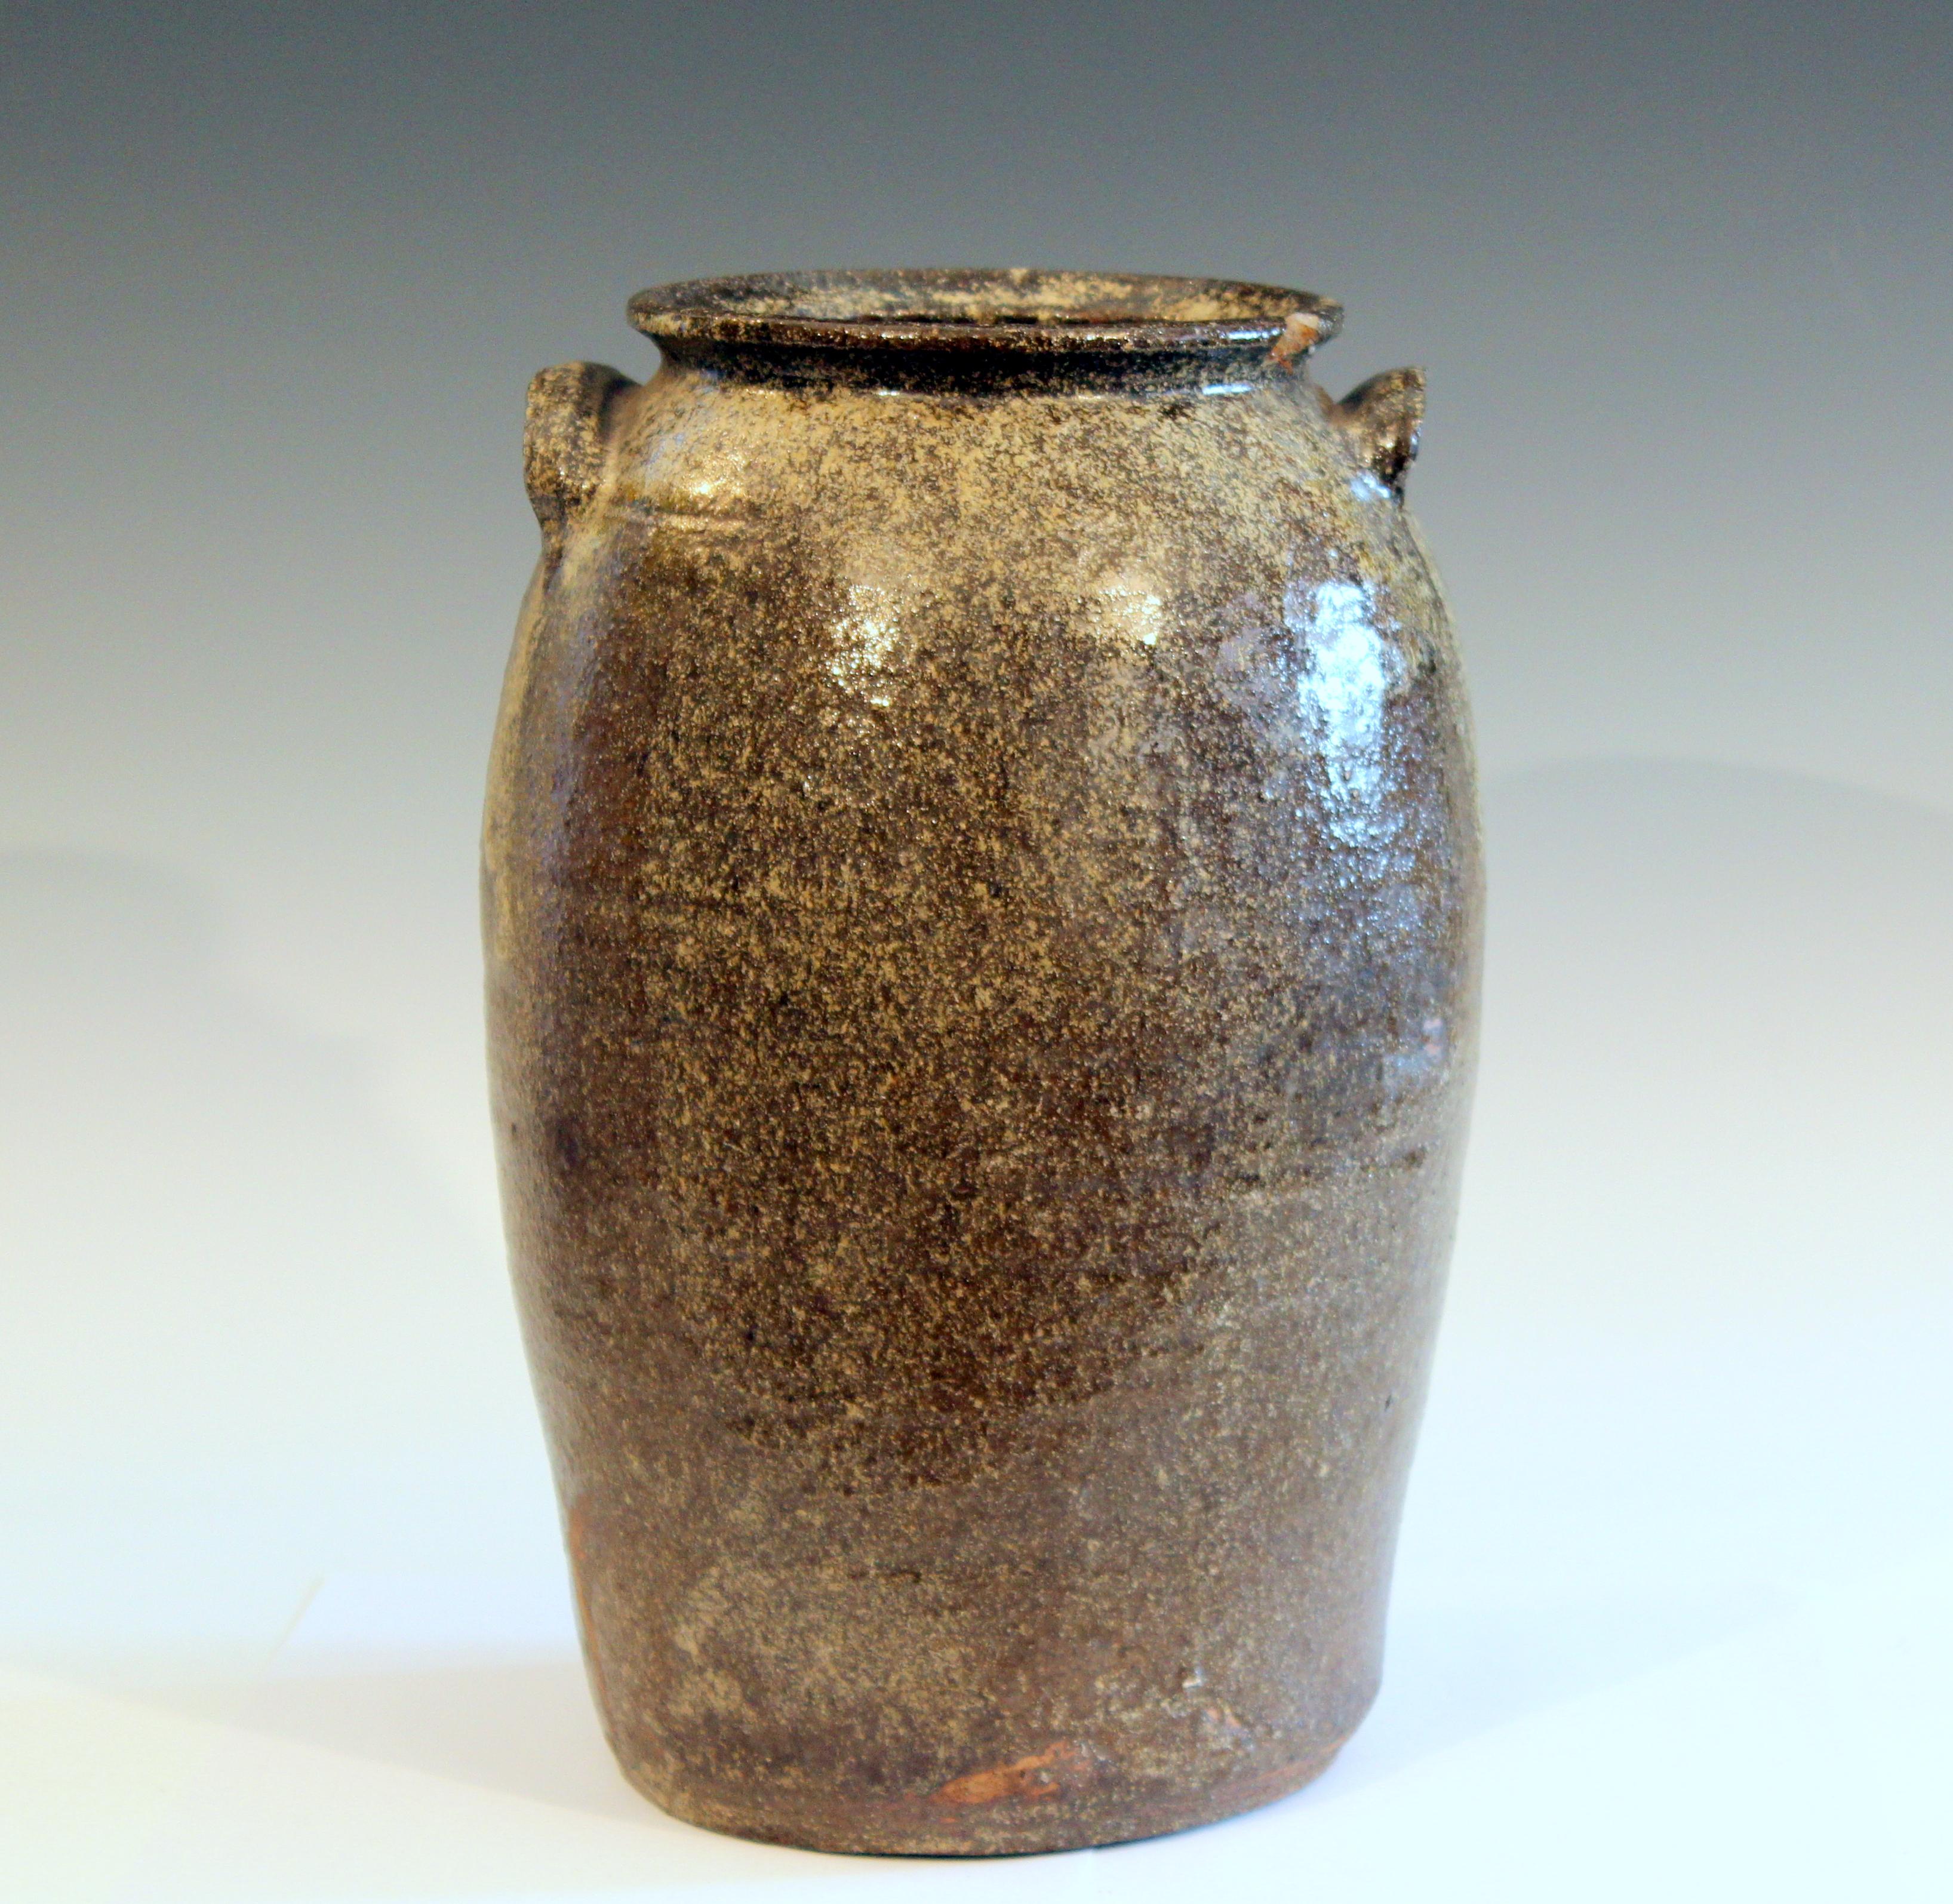 Antique Catawba Valley NC jar with brown/green alkaline glaze, circa 19th century. Terrific lichen-like contrast to the crystalline glaze with hints of blue flambe at the edges of some of the drips. 13 1/2